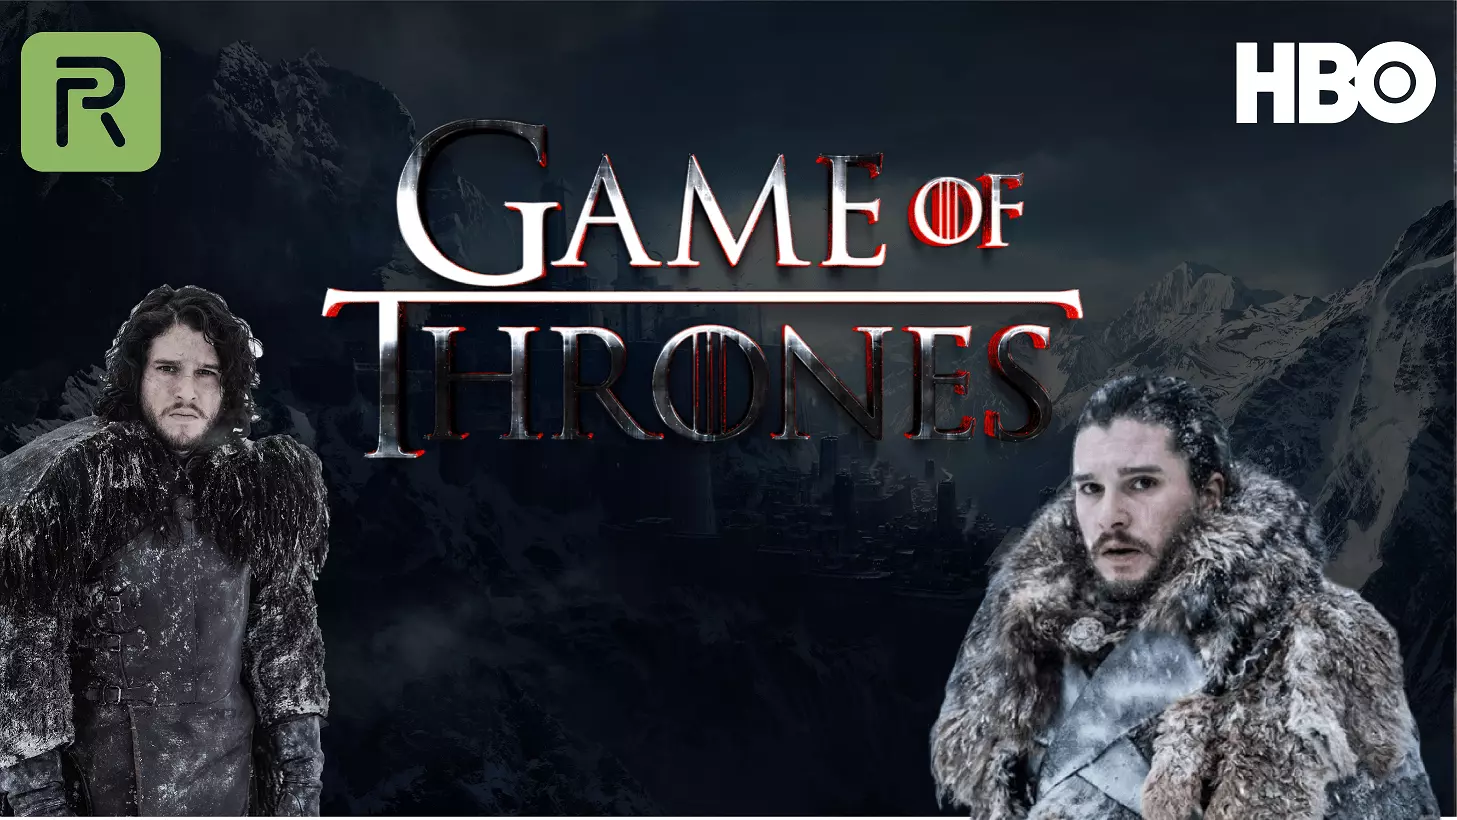 Game of Thrones spin-off series centered on Jon Snow may take a long time to happen Roznama Pakistan Entertainment